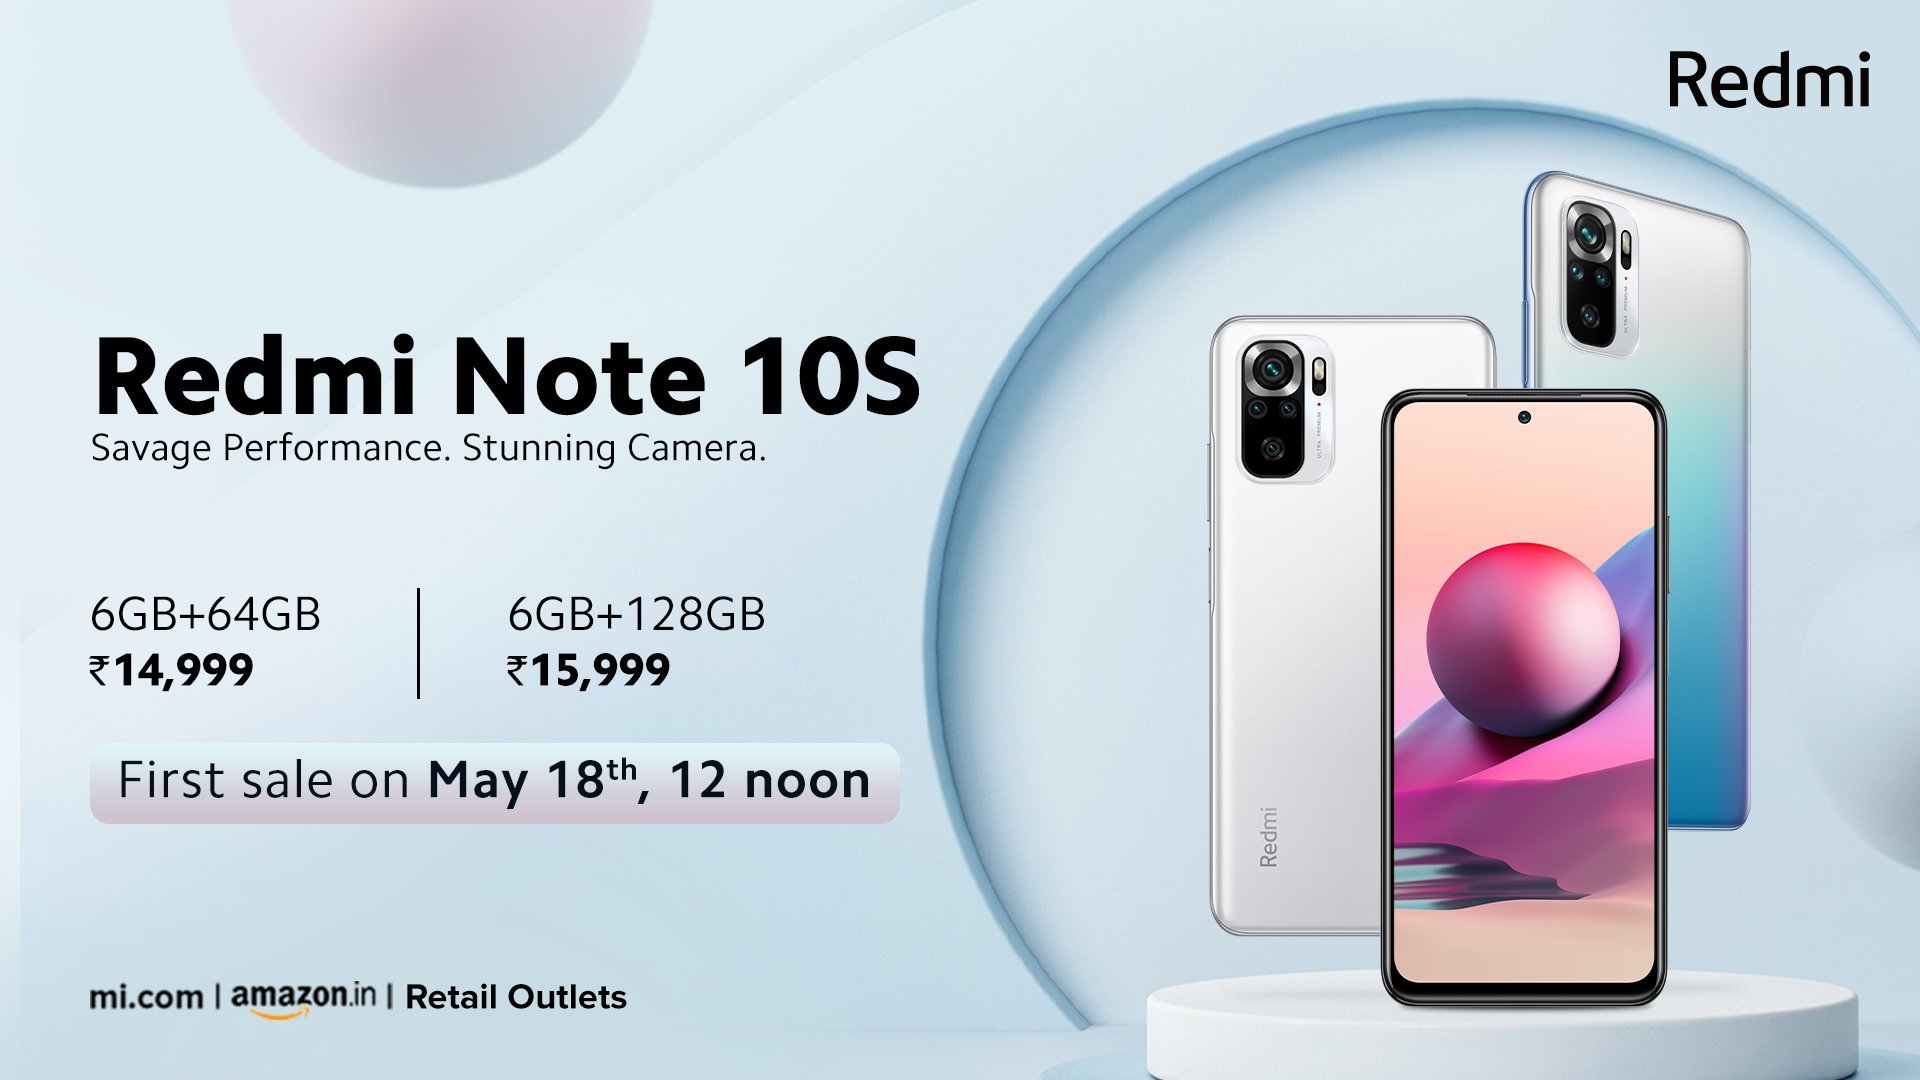 Xiaomi Redmi Note 10S officially launched with a 6.43-inch AMOLED display; check prices, features, and more | DroidAfrica